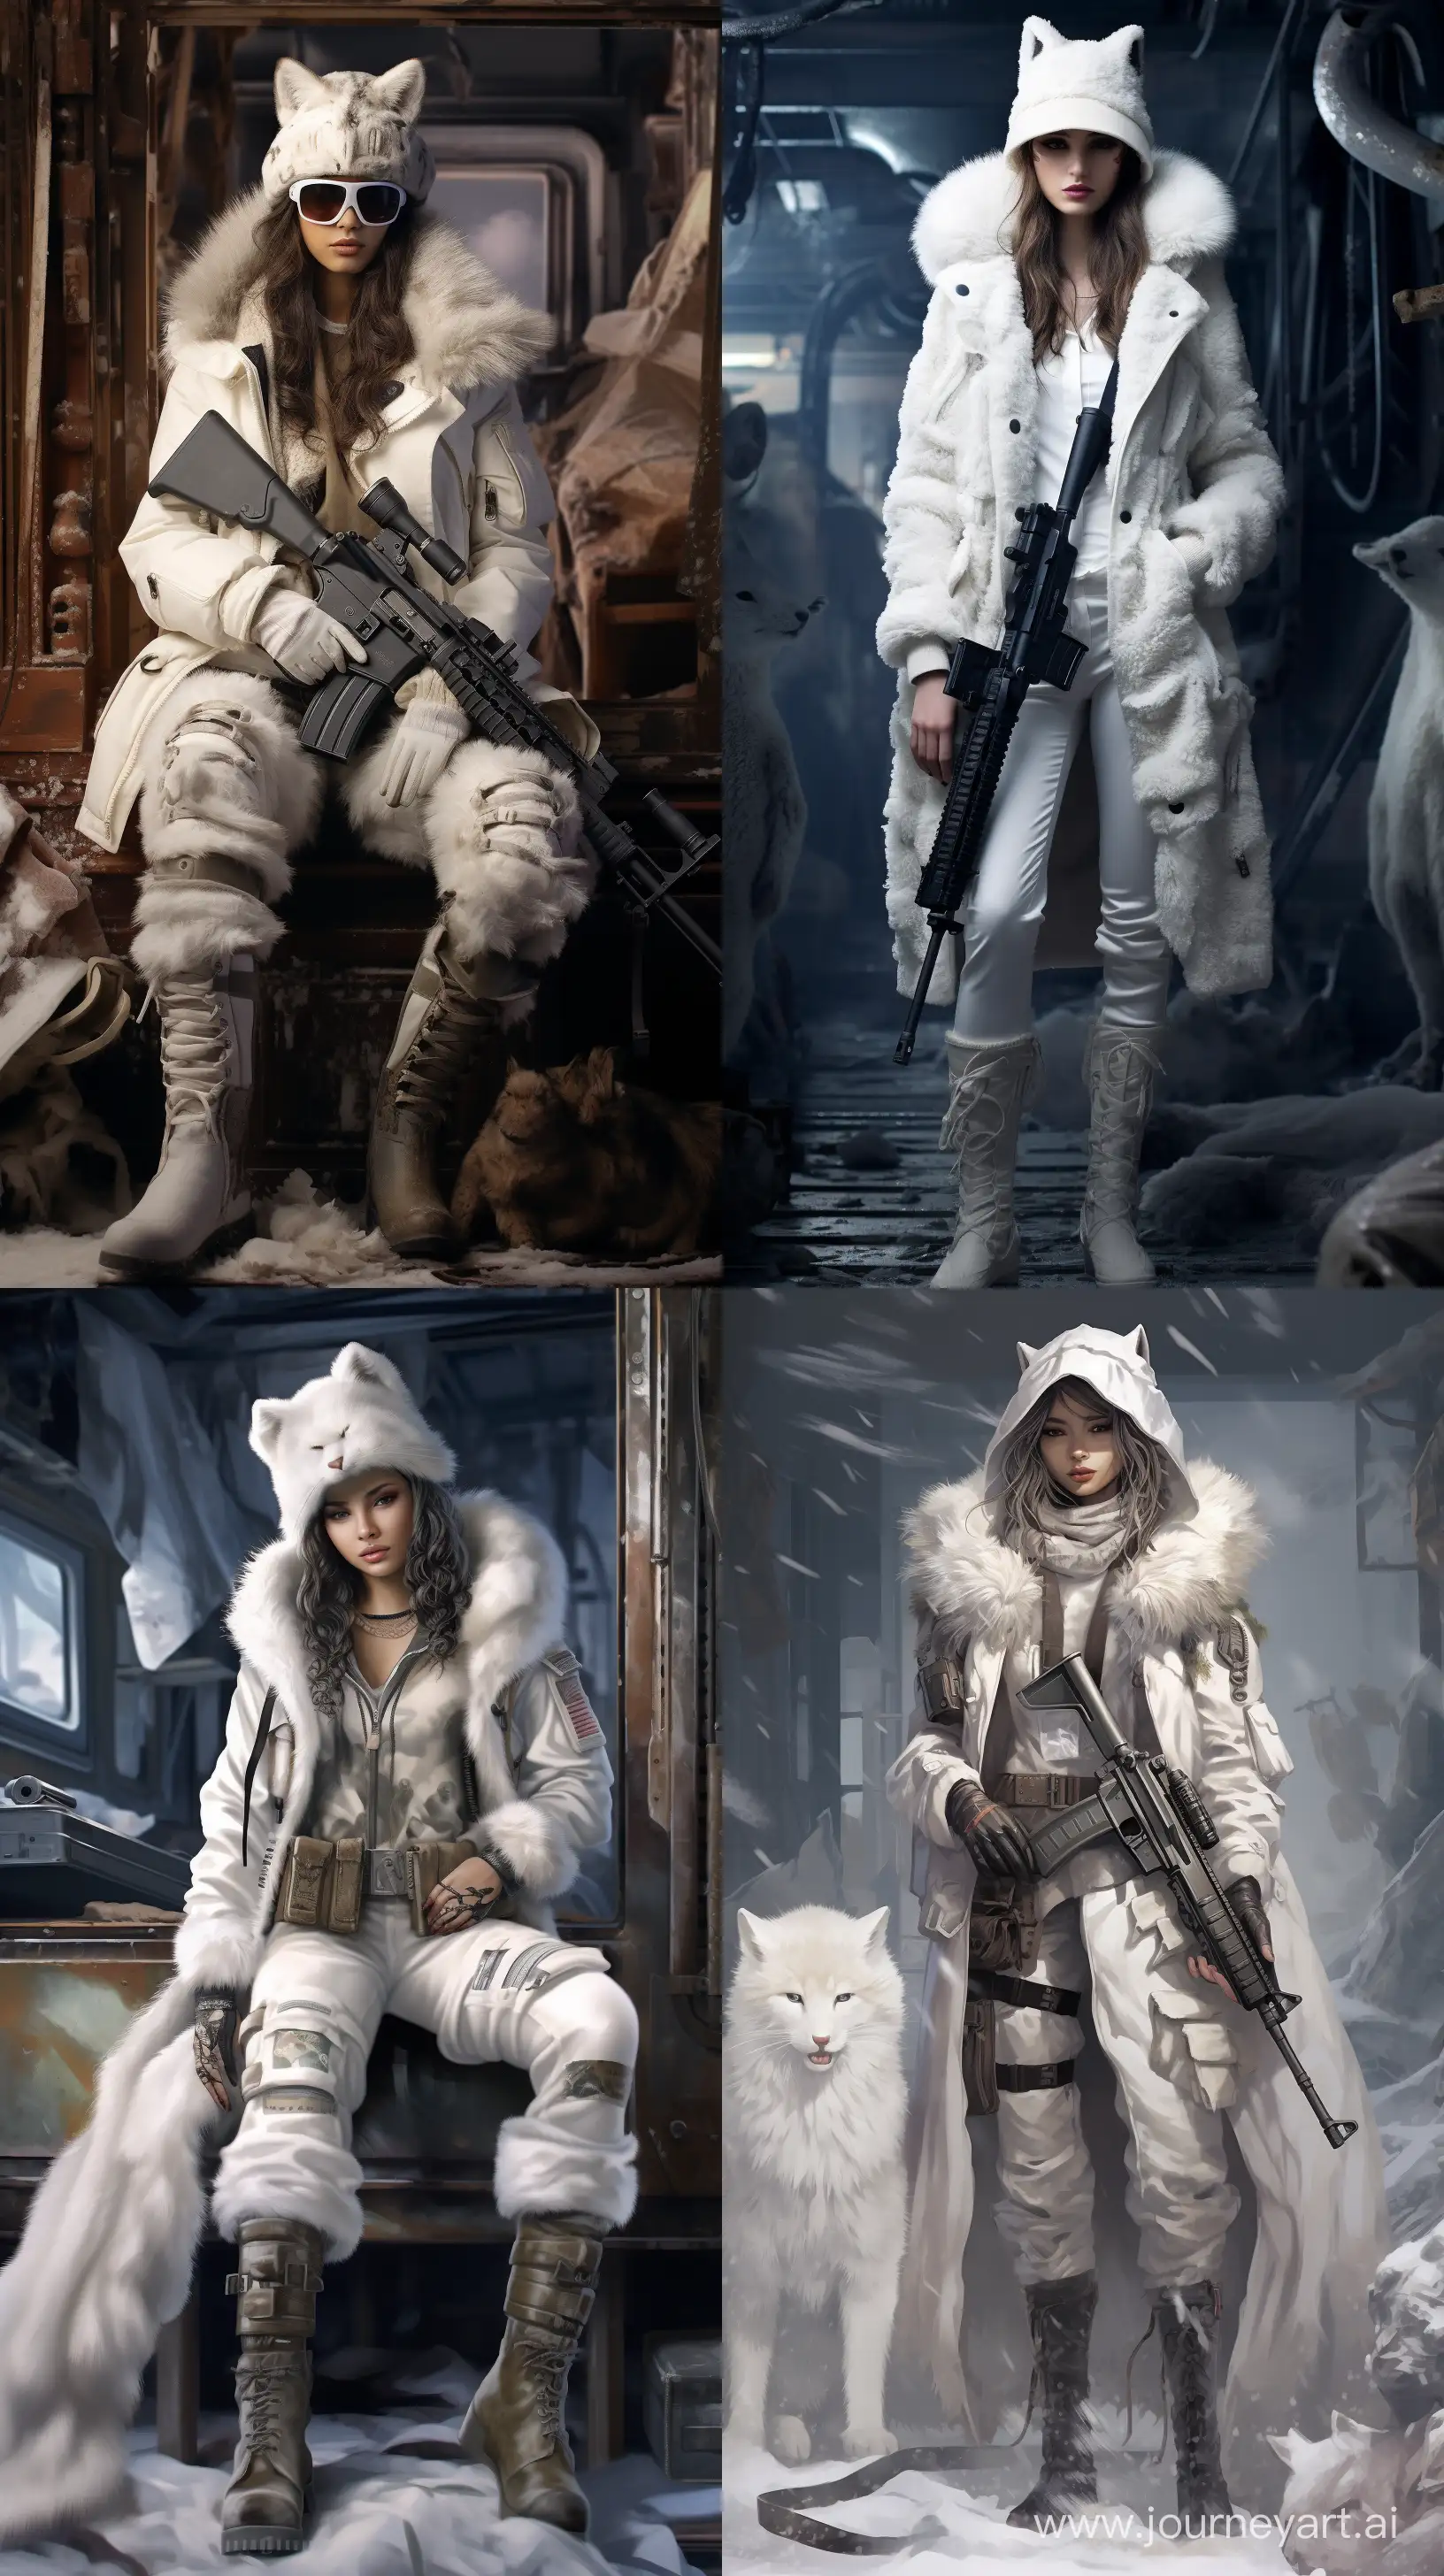 PostApocalyptic-Tomboy-in-Snow-Camouflage-Transgender-Woman-in-Fur-Outfit